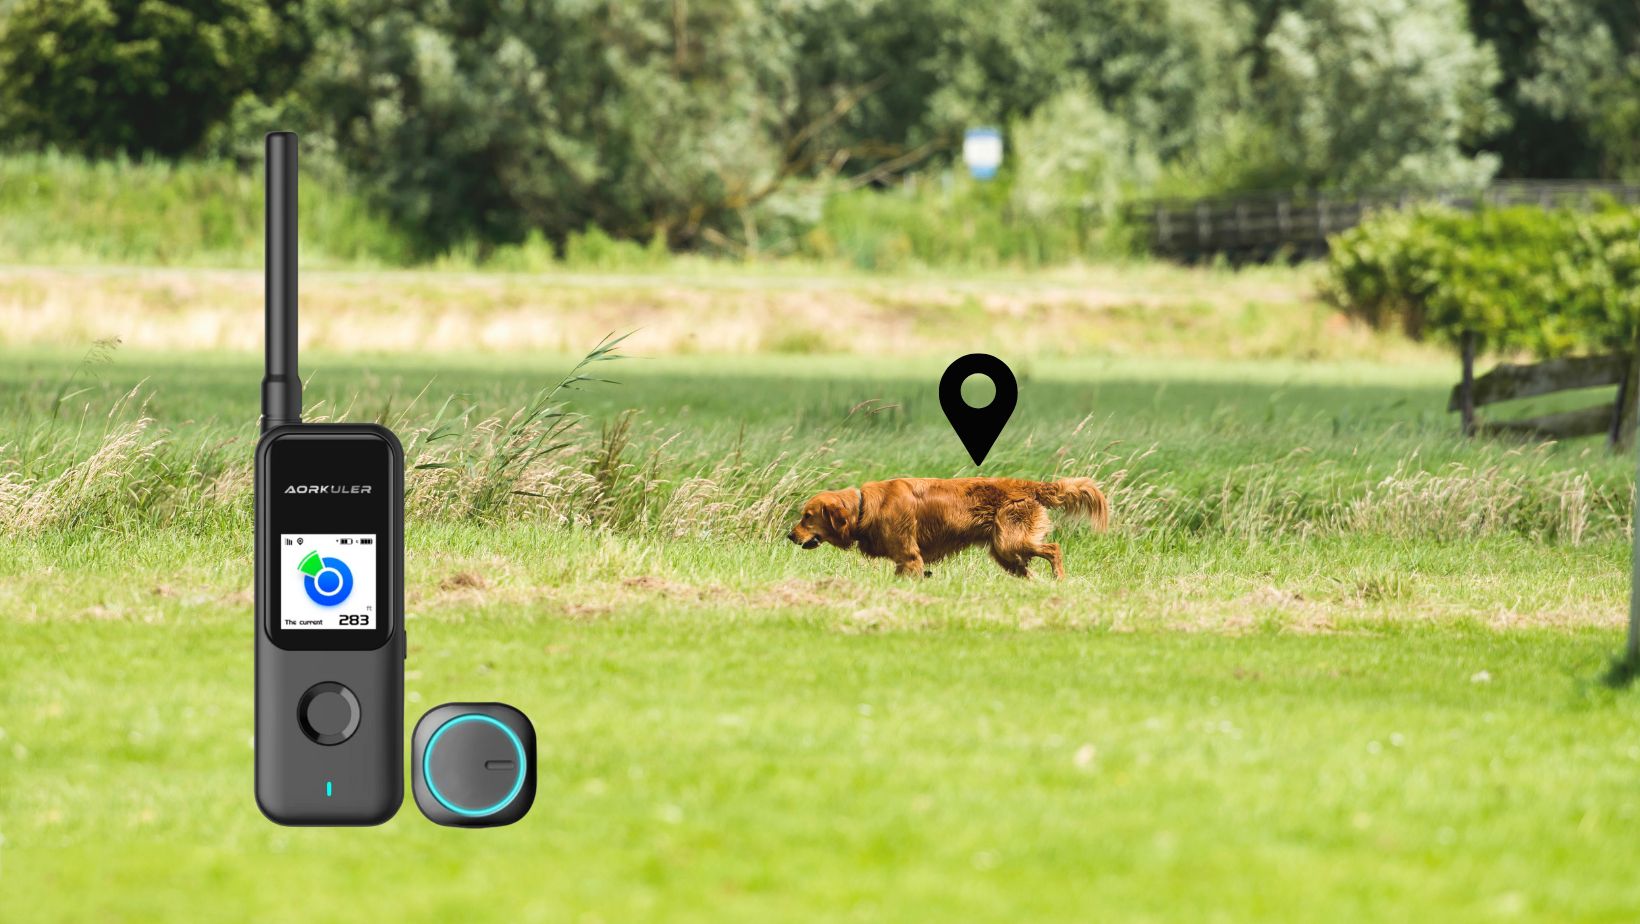 7 Essential Considerations When Choosing a Dog Tracking Device